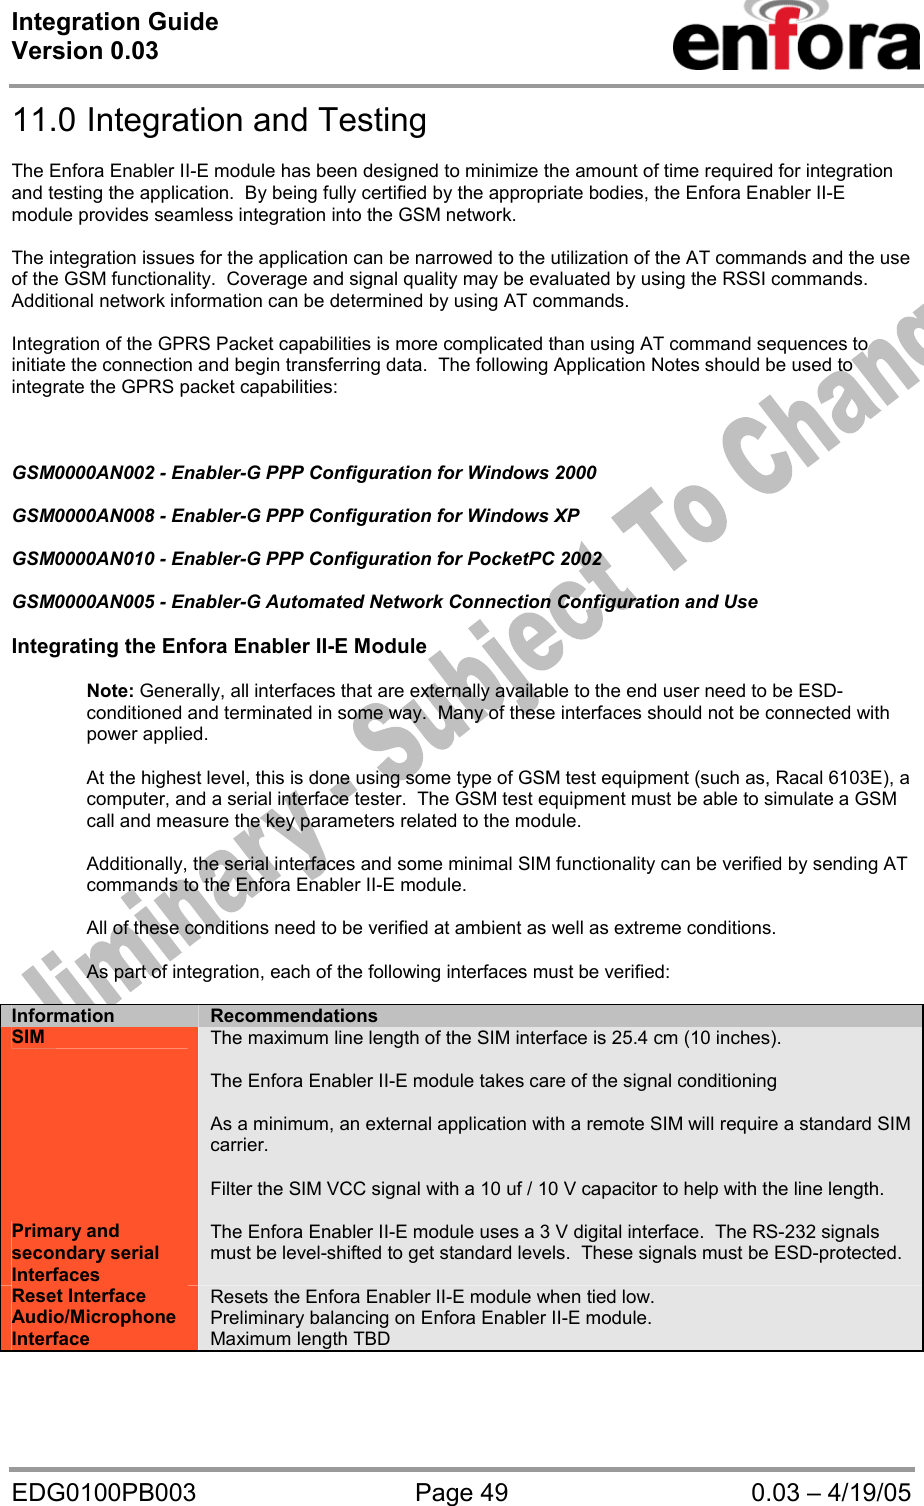 Integration Guide  Version 0.03   EDG0100PB003  Page 49  0.03 – 4/19/05 11.0 Integration and Testing  The Enfora Enabler II-E module has been designed to minimize the amount of time required for integration and testing the application.  By being fully certified by the appropriate bodies, the Enfora Enabler II-E module provides seamless integration into the GSM network.  The integration issues for the application can be narrowed to the utilization of the AT commands and the use of the GSM functionality.  Coverage and signal quality may be evaluated by using the RSSI commands.  Additional network information can be determined by using AT commands.  Integration of the GPRS Packet capabilities is more complicated than using AT command sequences to initiate the connection and begin transferring data.  The following Application Notes should be used to integrate the GPRS packet capabilities:    GSM0000AN002 - Enabler-G PPP Configuration for Windows 2000  GSM0000AN008 - Enabler-G PPP Configuration for Windows XP  GSM0000AN010 - Enabler-G PPP Configuration for PocketPC 2002  GSM0000AN005 - Enabler-G Automated Network Connection Configuration and Use  Integrating the Enfora Enabler II-E Module  Note: Generally, all interfaces that are externally available to the end user need to be ESD-conditioned and terminated in some way.  Many of these interfaces should not be connected with power applied.  At the highest level, this is done using some type of GSM test equipment (such as, Racal 6103E), a computer, and a serial interface tester.  The GSM test equipment must be able to simulate a GSM call and measure the key parameters related to the module.  Additionally, the serial interfaces and some minimal SIM functionality can be verified by sending AT commands to the Enfora Enabler II-E module.  All of these conditions need to be verified at ambient as well as extreme conditions.  As part of integration, each of the following interfaces must be verified:  Information  Recommendations SIM  The maximum line length of the SIM interface is 25.4 cm (10 inches).  The Enfora Enabler II-E module takes care of the signal conditioning  As a minimum, an external application with a remote SIM will require a standard SIM carrier.  Filter the SIM VCC signal with a 10 uf / 10 V capacitor to help with the line length.  Primary and secondary serial Interfaces The Enfora Enabler II-E module uses a 3 V digital interface.  The RS-232 signals must be level-shifted to get standard levels.  These signals must be ESD-protected. Reset Interface  Resets the Enfora Enabler II-E module when tied low. Audio/Microphone Interface Preliminary balancing on Enfora Enabler II-E module. Maximum length TBD  